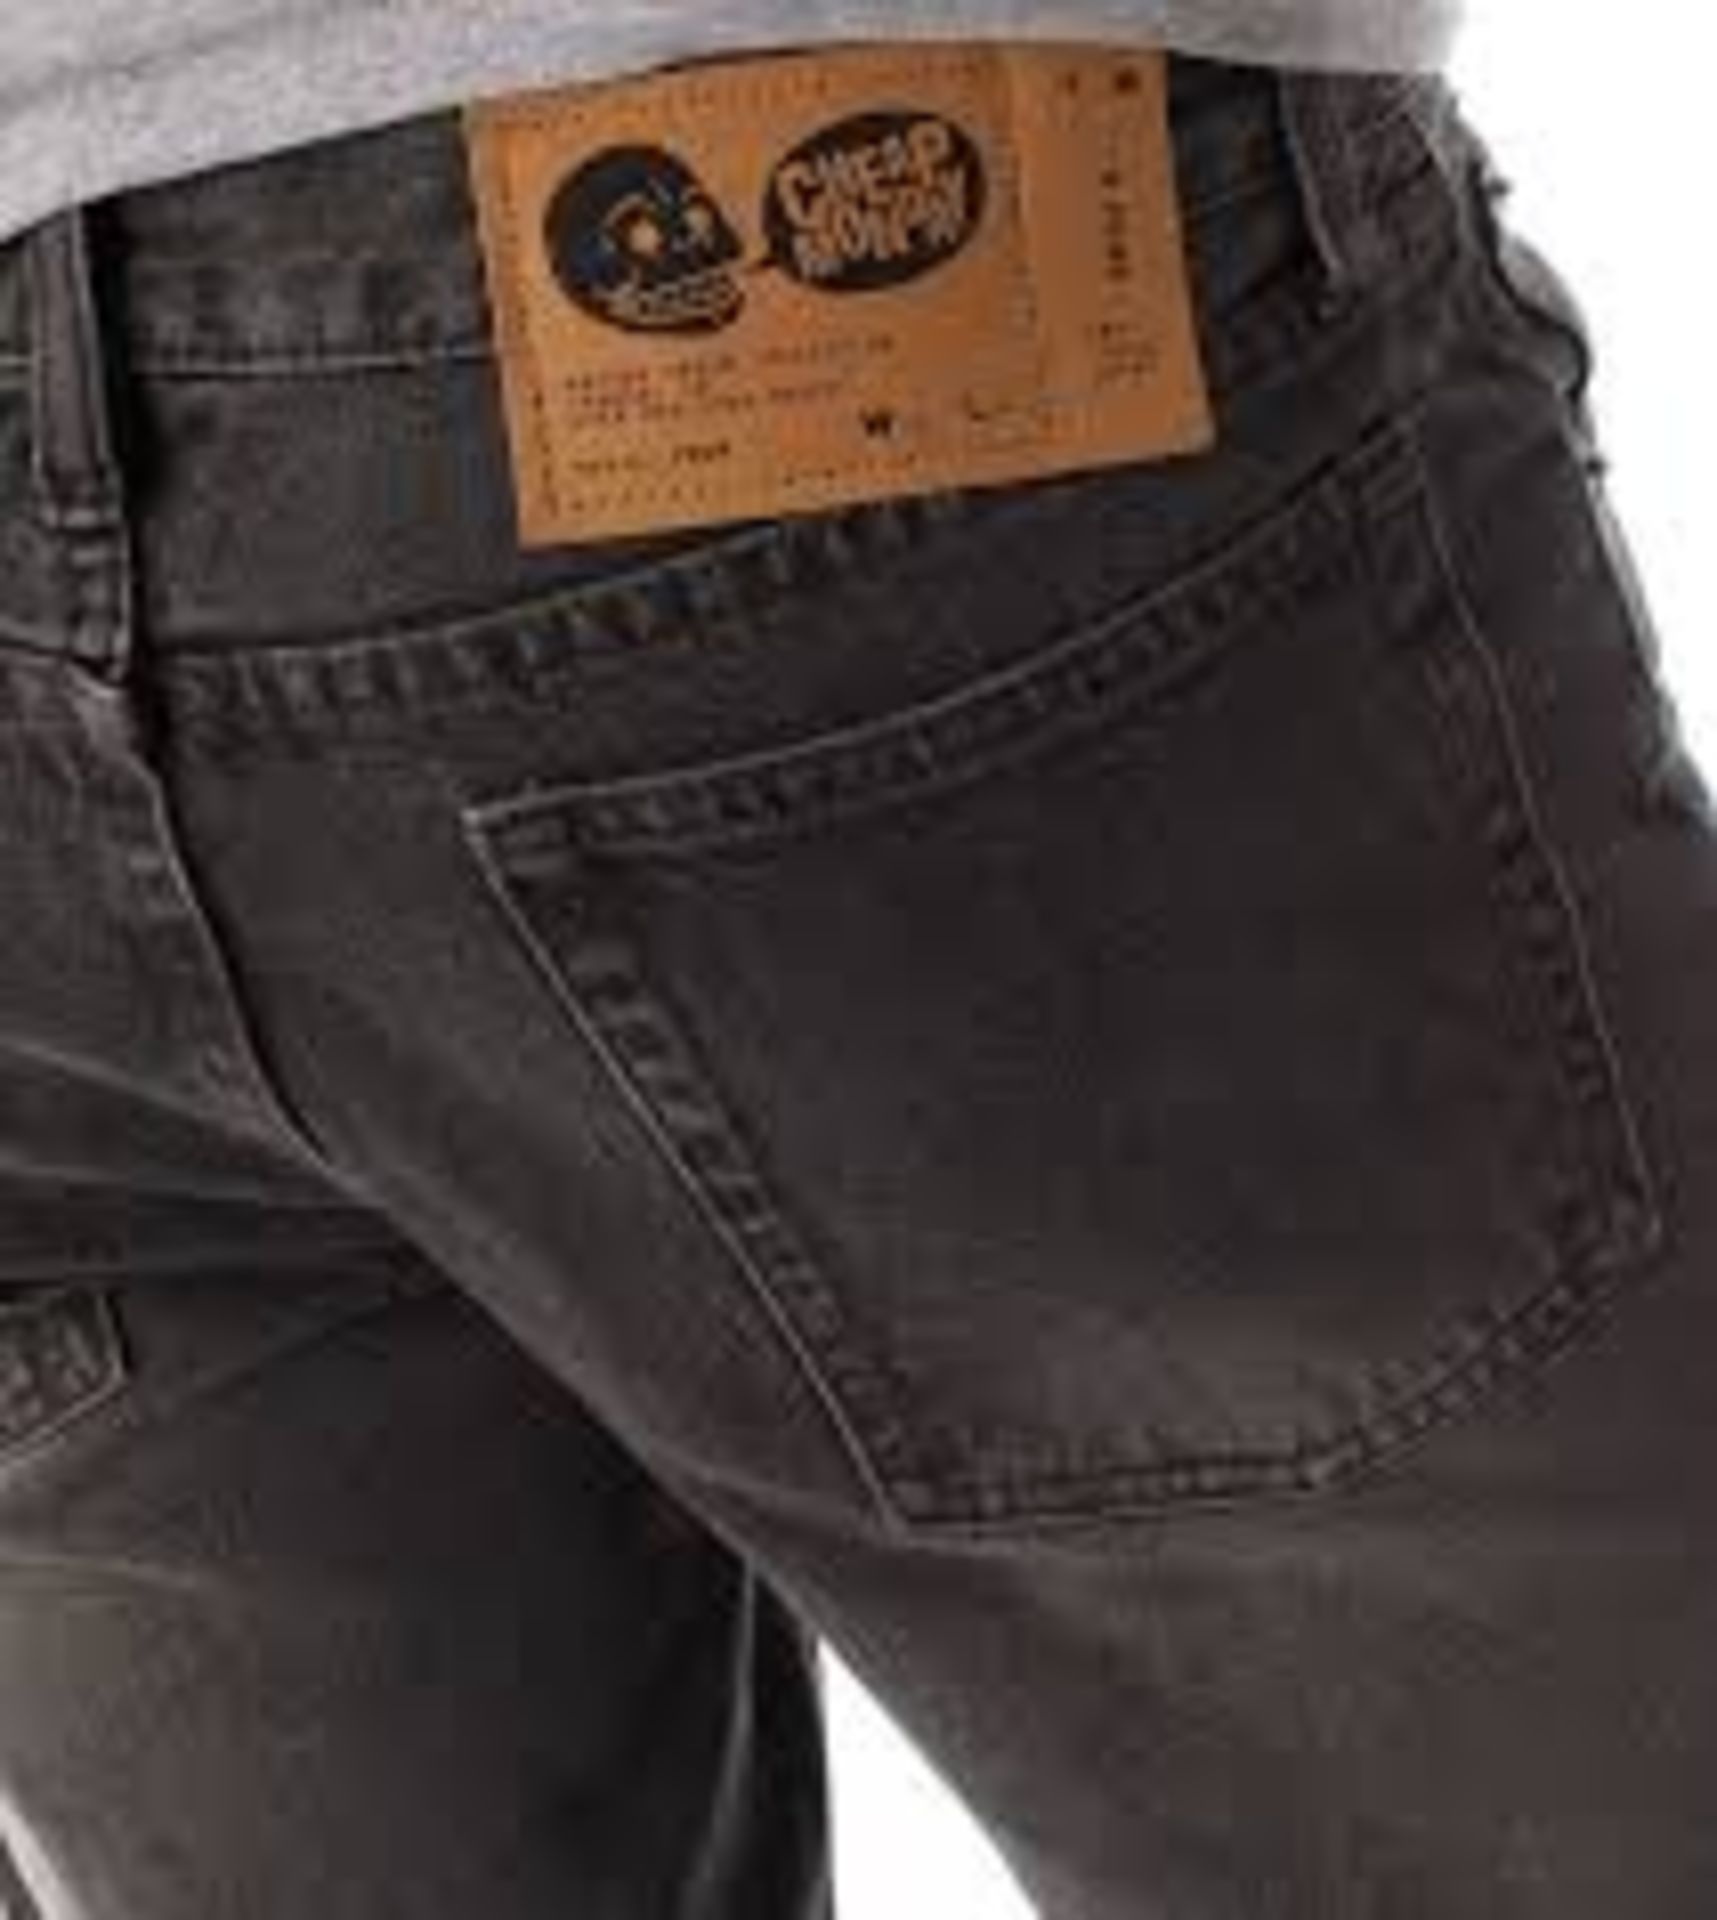 Cheap Monday In Law Jeans. Style: Tapered Crop. See descripion for sizes. Total RRP £225.00.